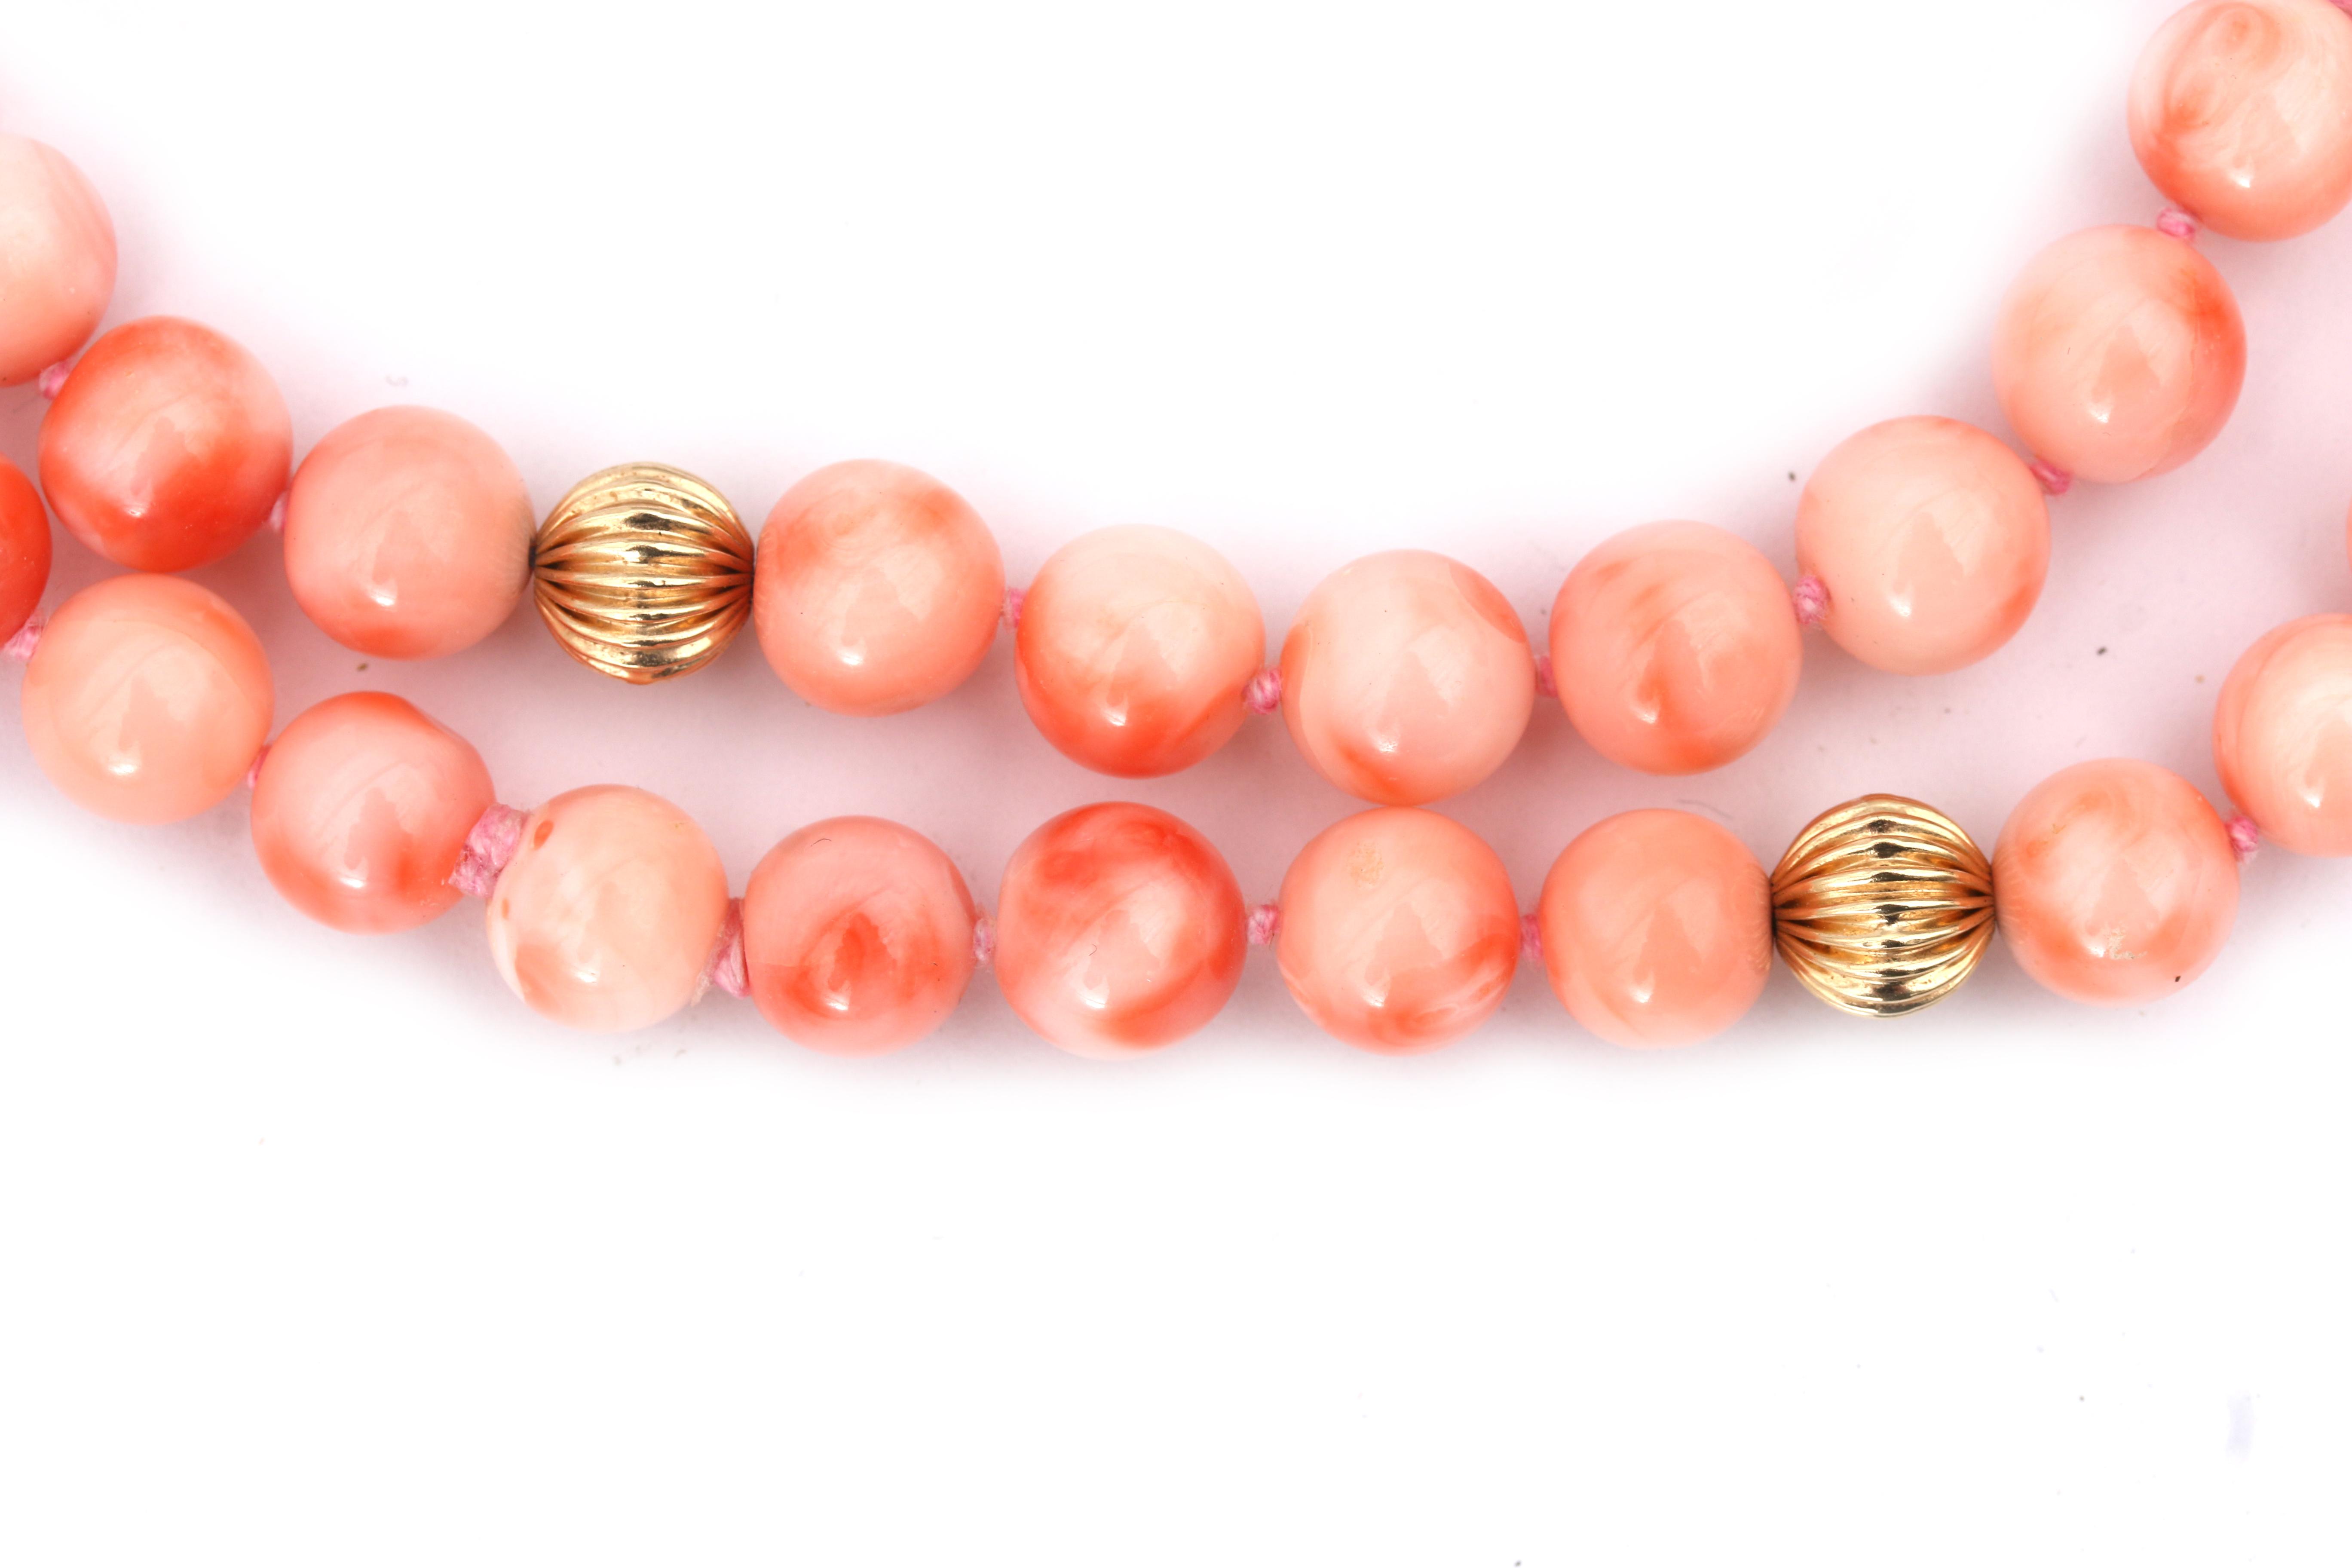 An angelskin coral bead necklace with gold spacers - Image 2 of 2